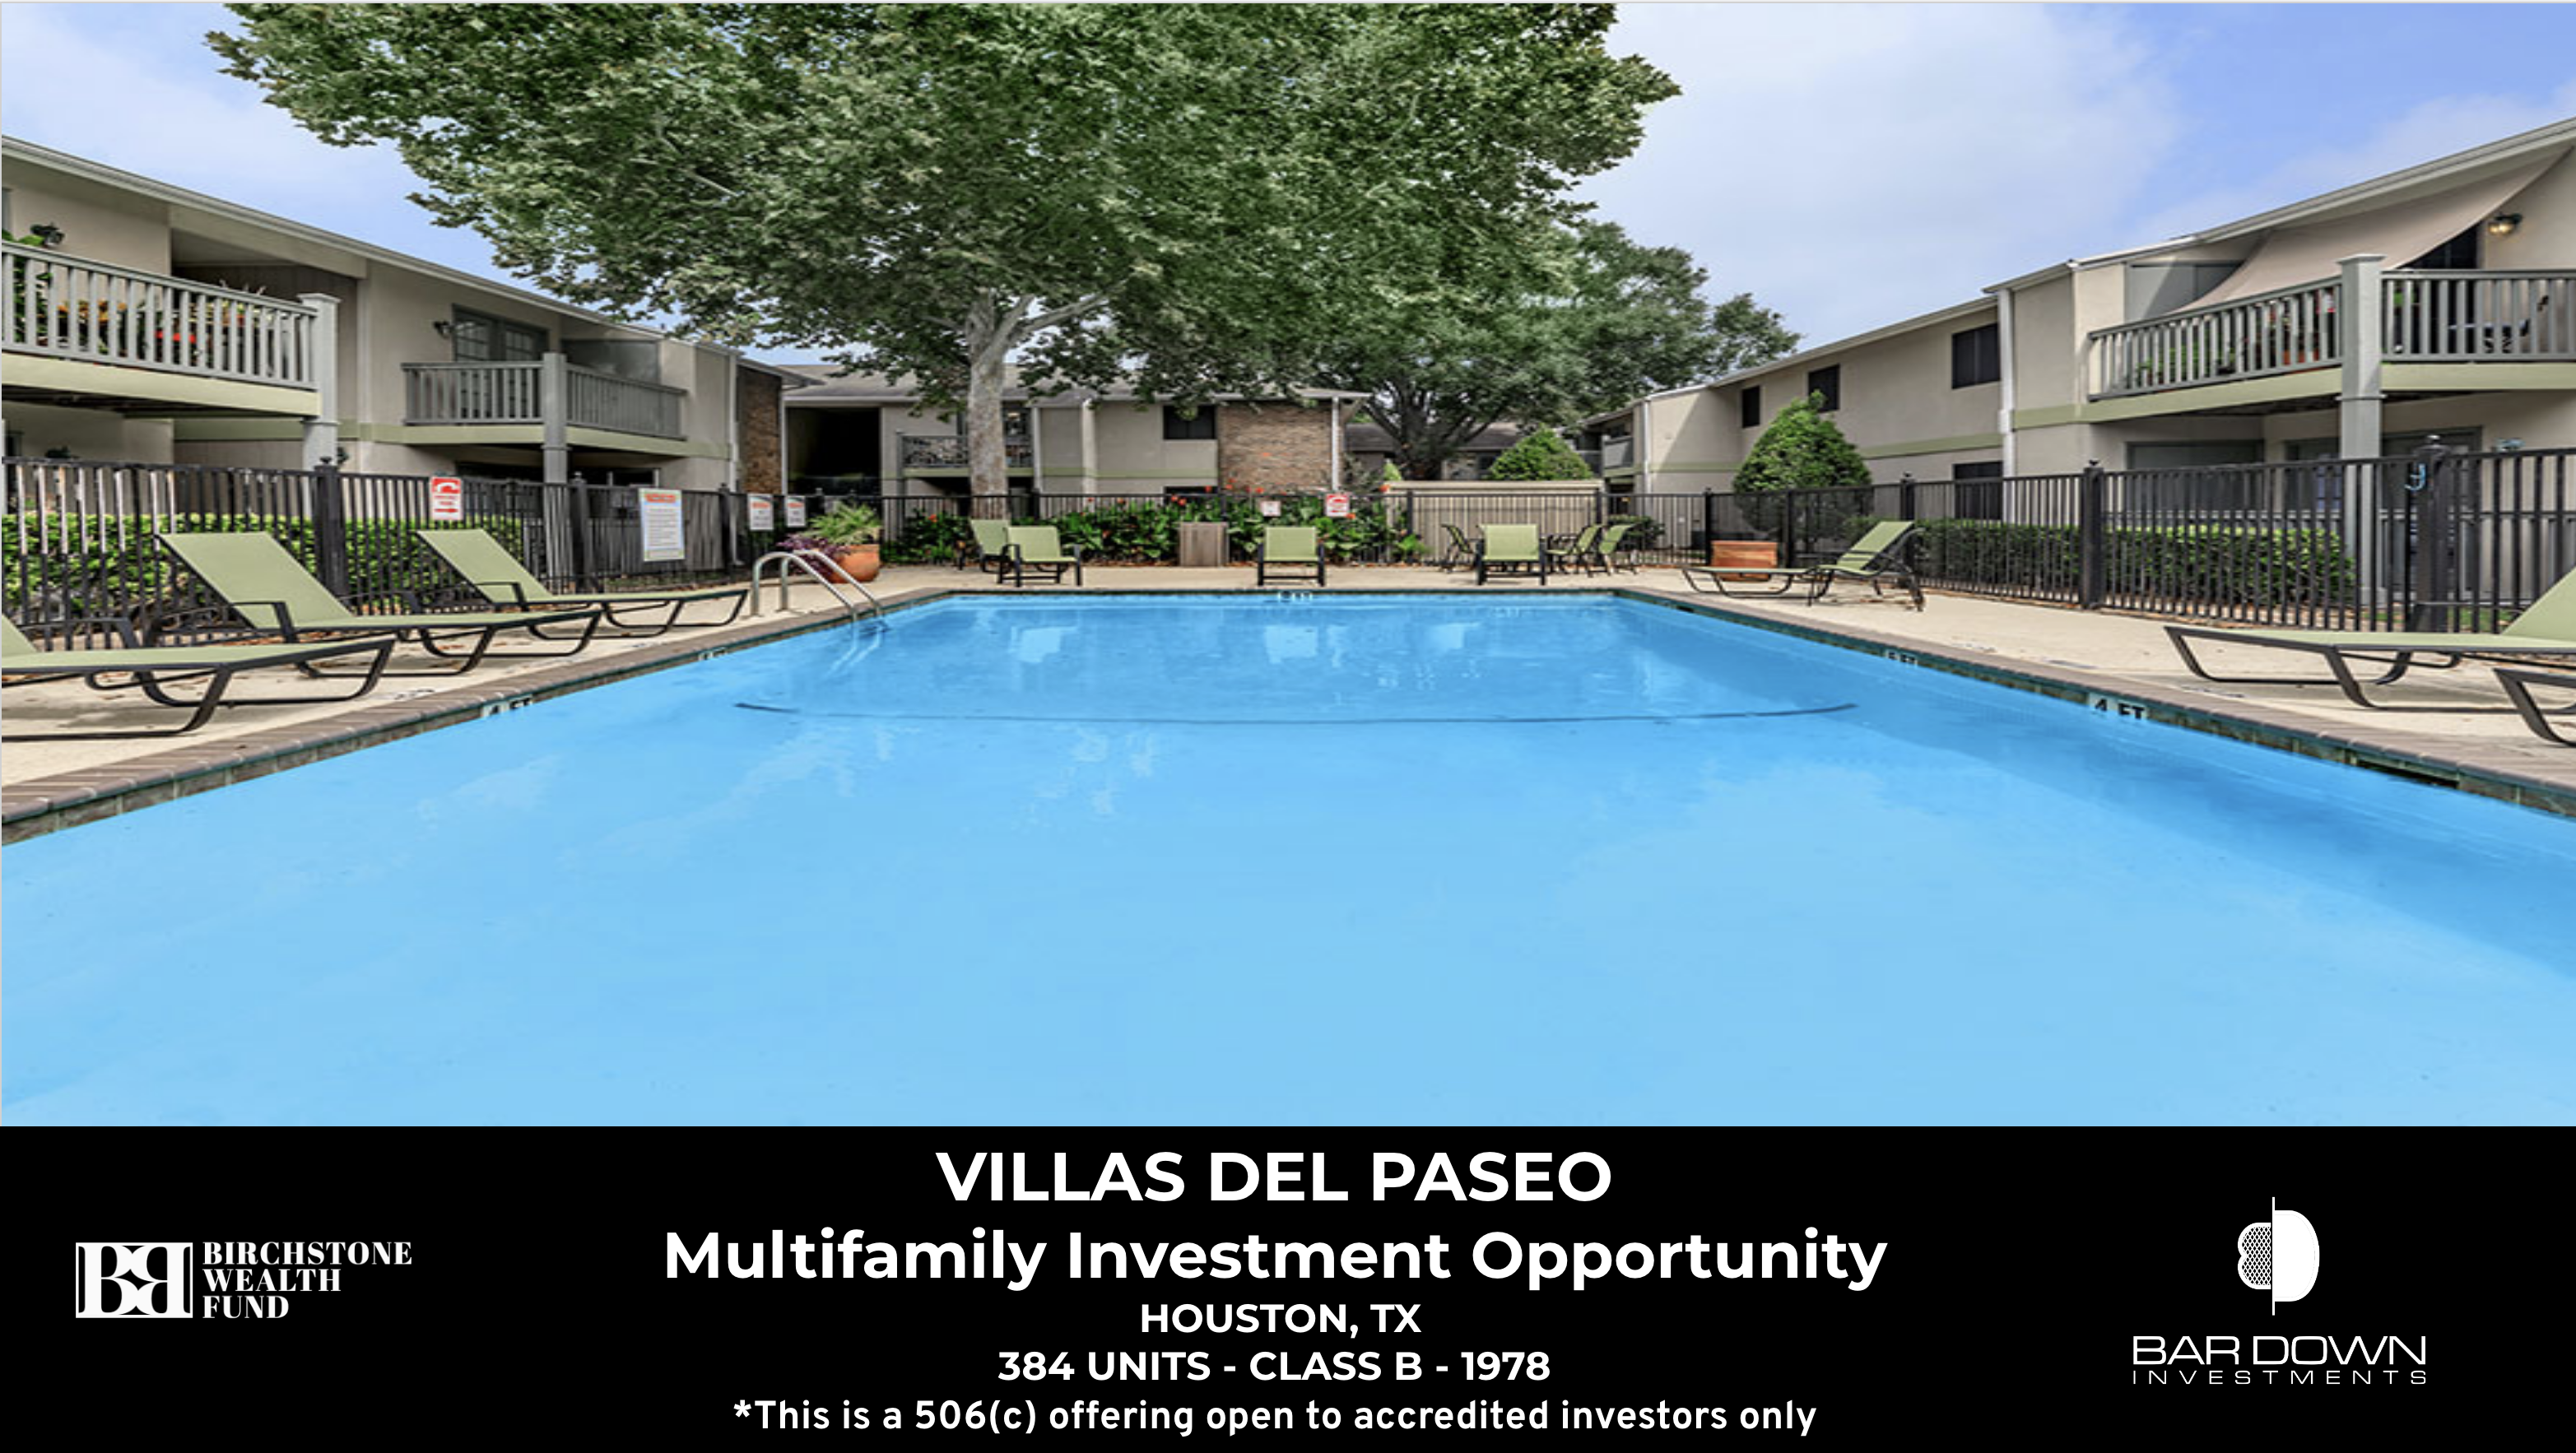 Villas dr passo multifamily investment opportunity.